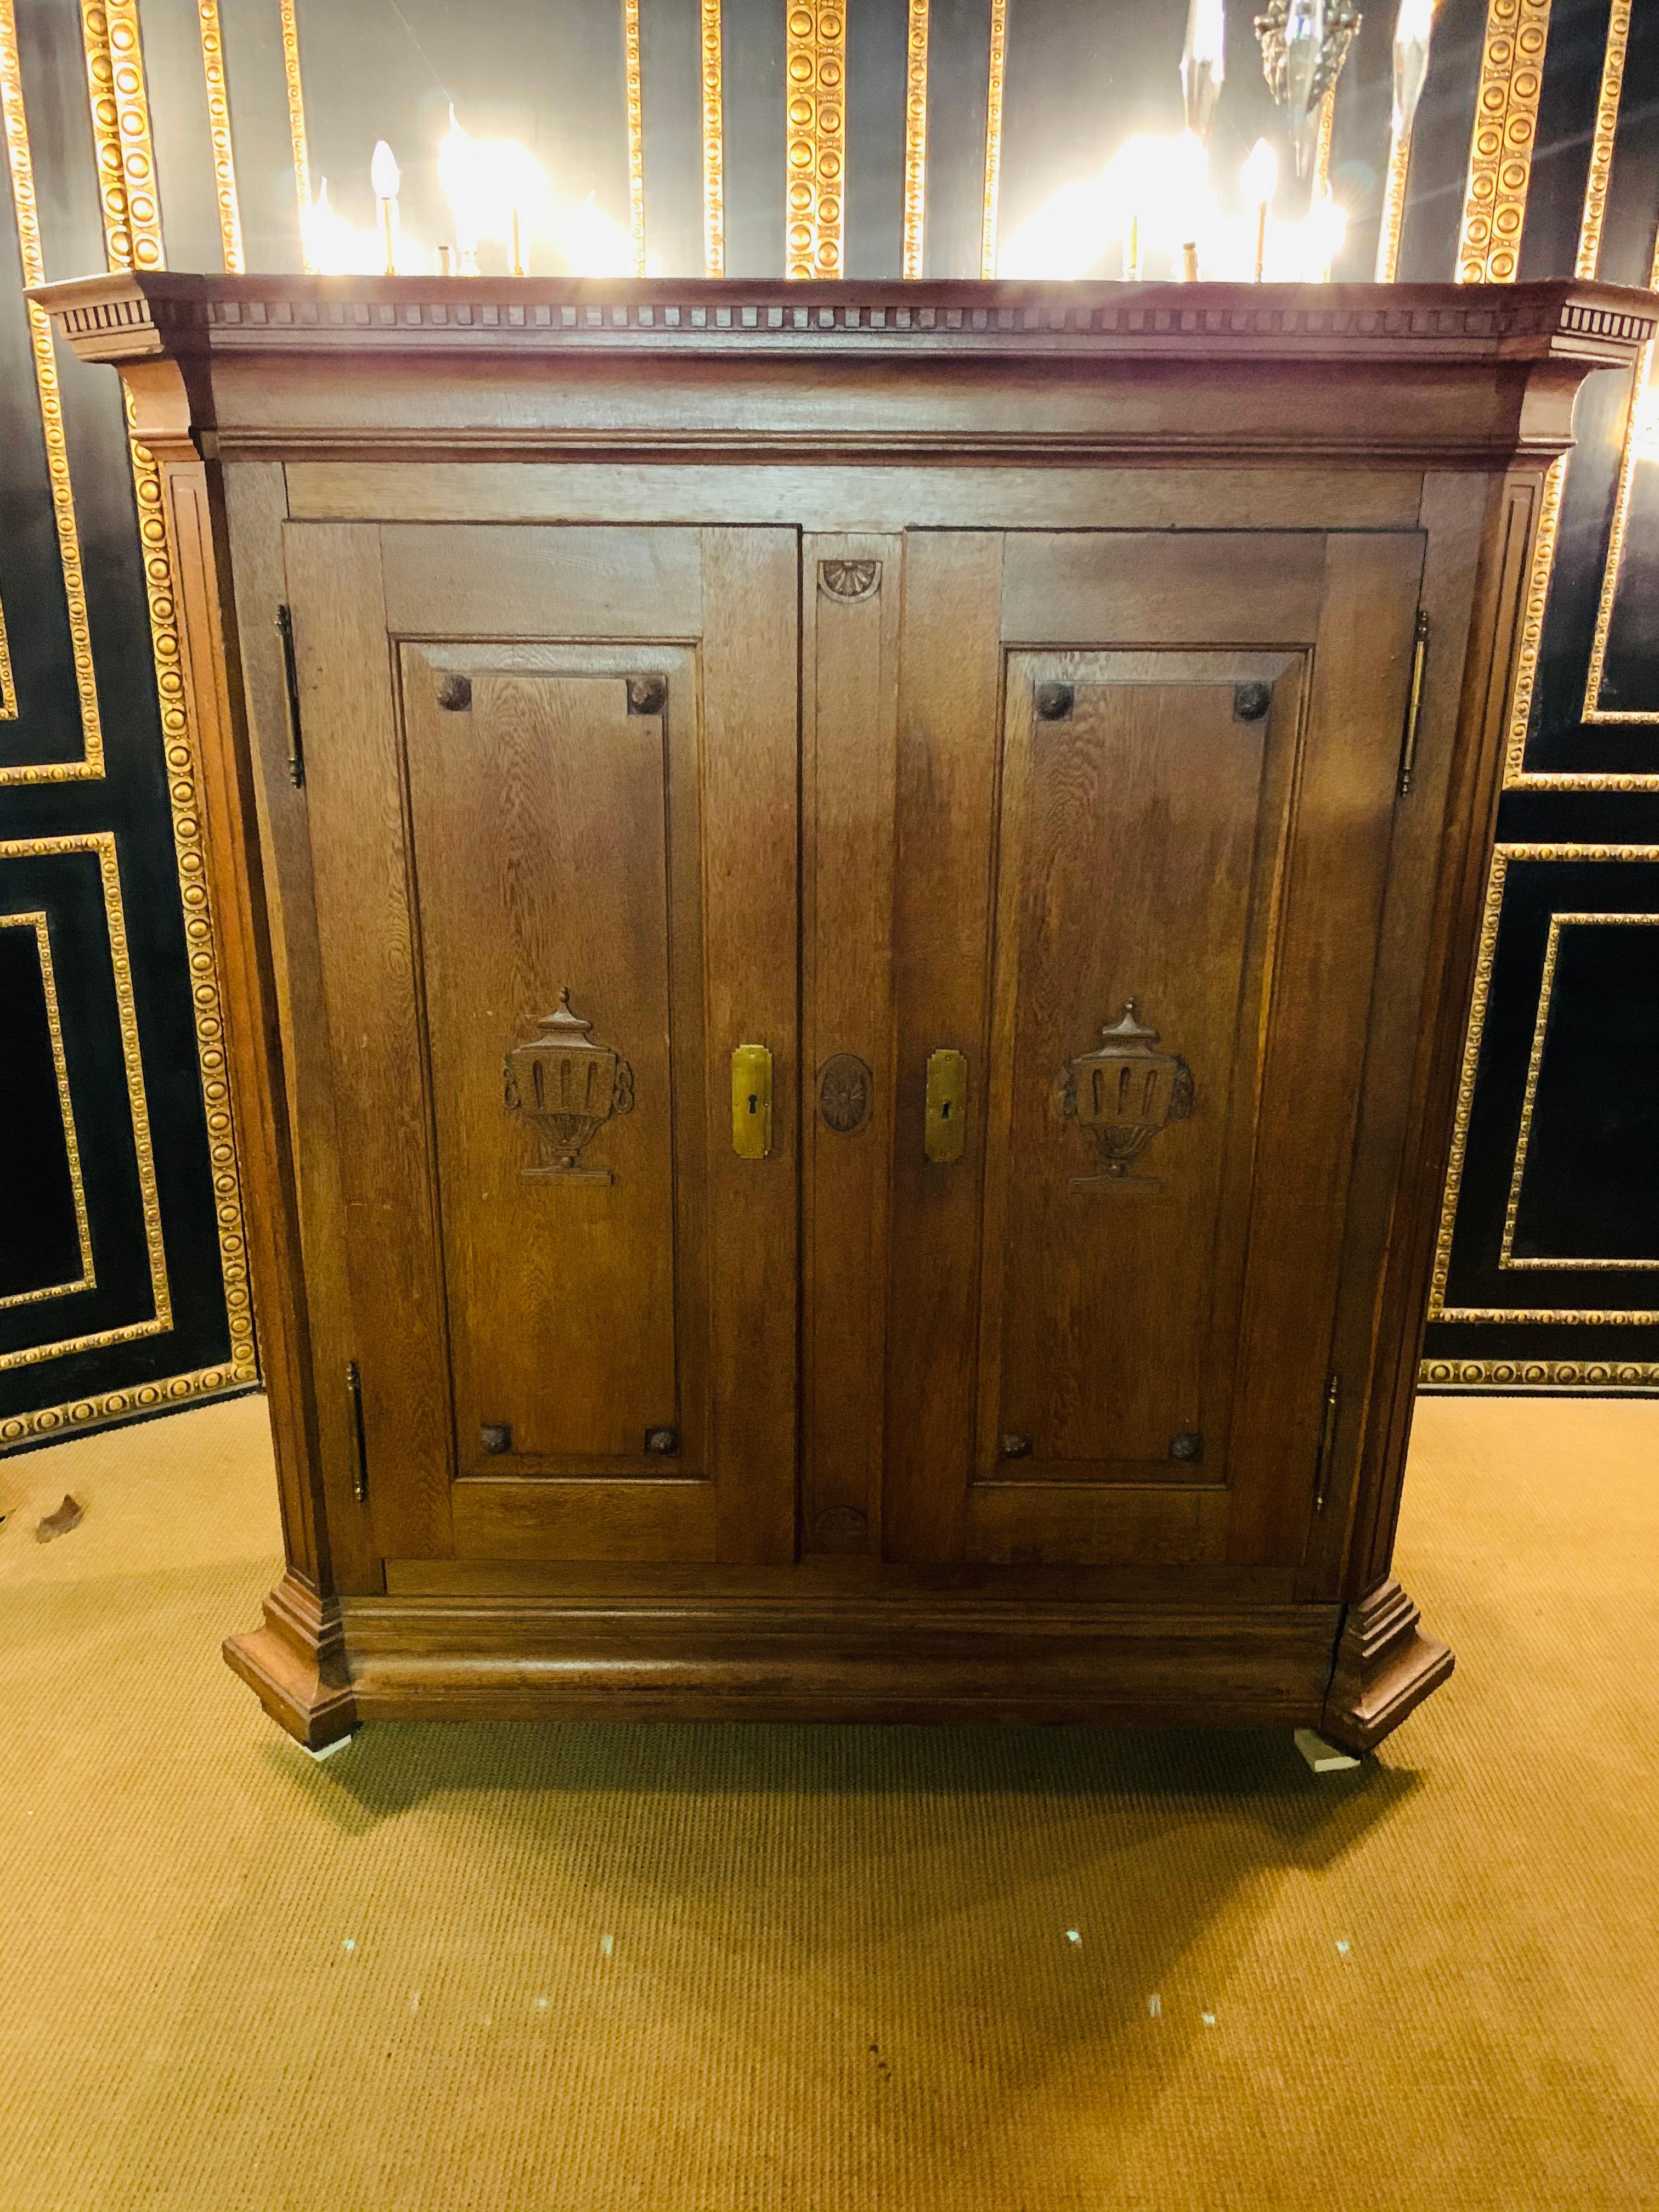 Unique Louis Seize hall cabinet-wardrobe from 1790

solid oak upright rectangular two-door body with profile-framed fields in the middle of each door a carved Amphora. Architecturally structured front.

 In good historical condition with a nice